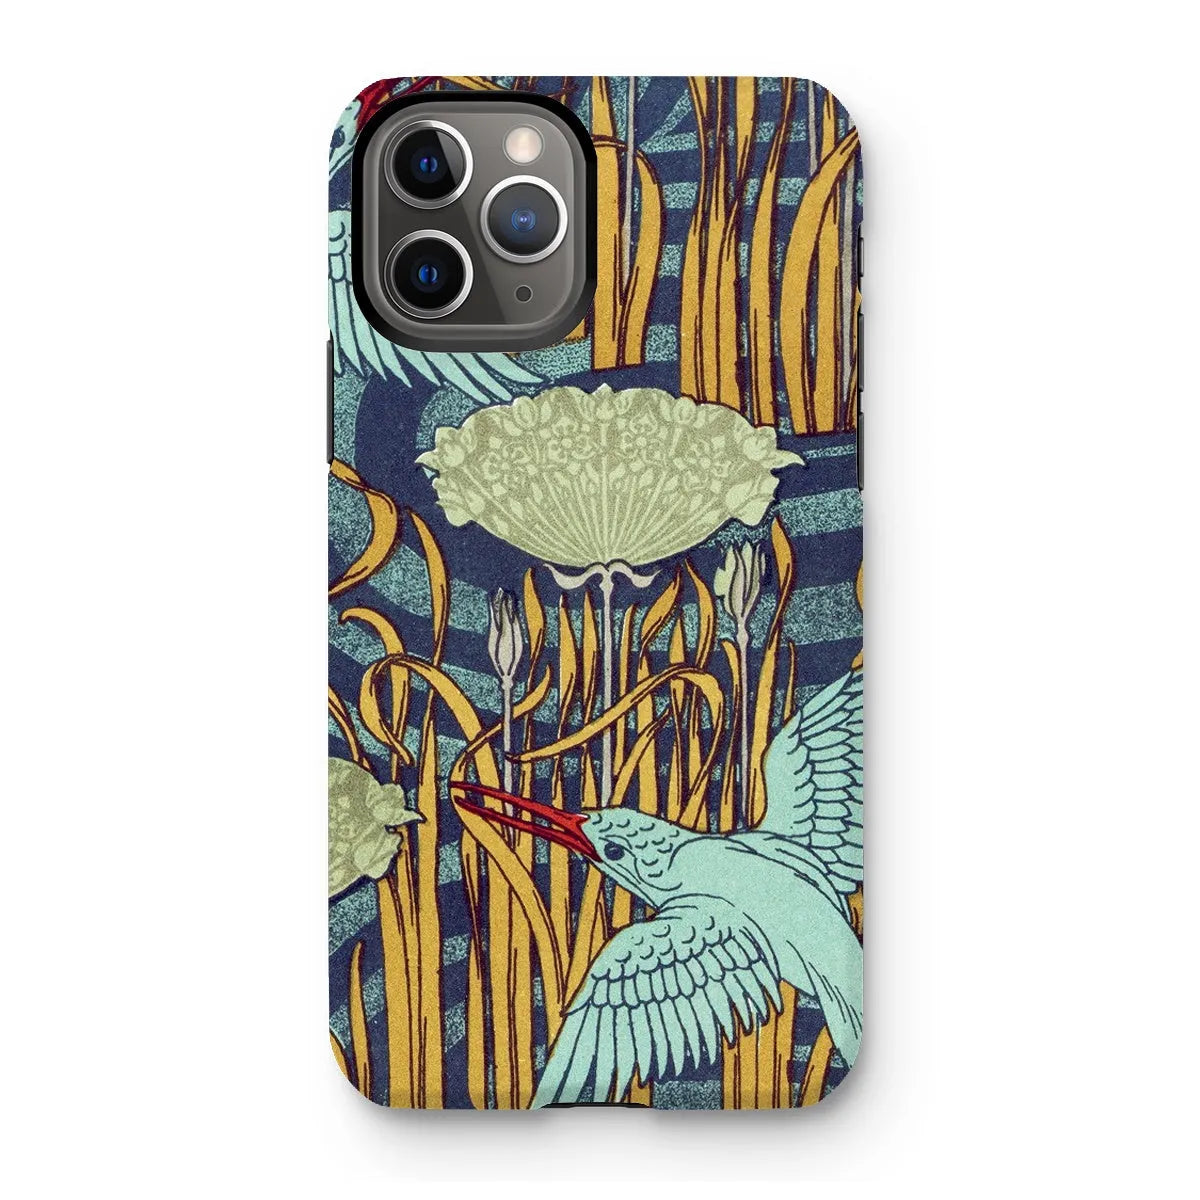 Kingfishers French Art Phone Case - Maurice Pillard Verneuil - Iphone 11 Pro / Matte - Mobile Phone Cases - Aesthetic